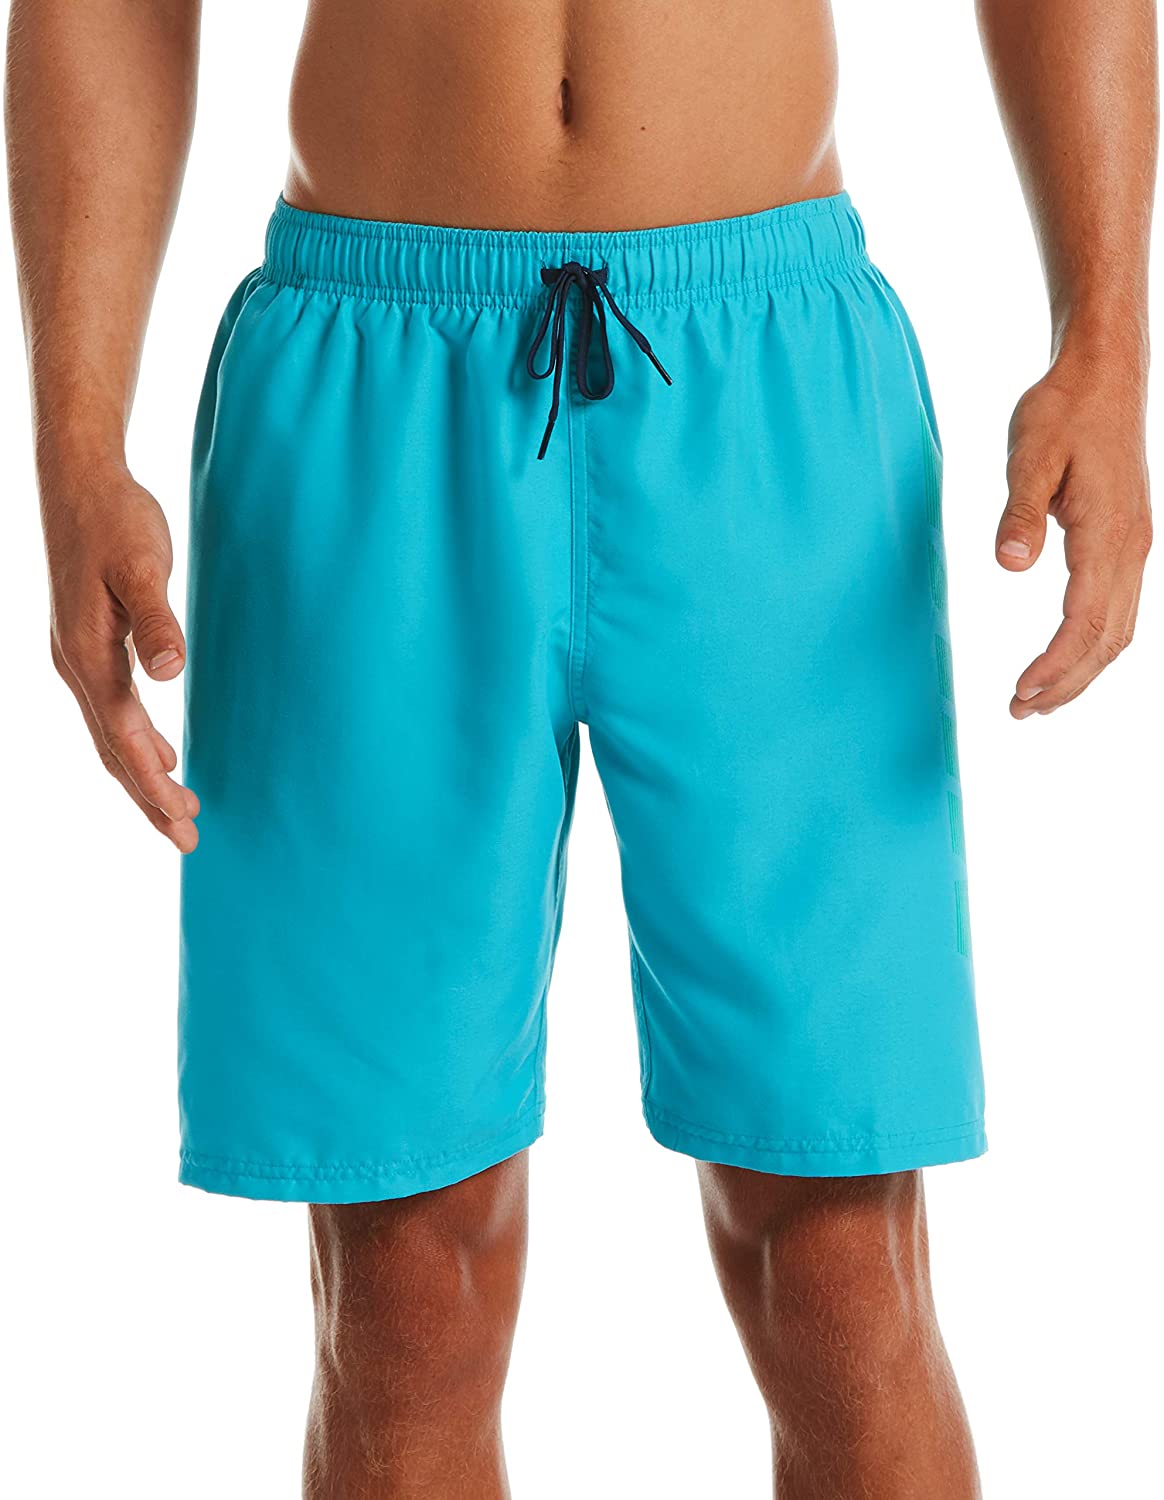 Men's Nike Logo Volley Short Swim Trunk in Oracle Aqua color from the front